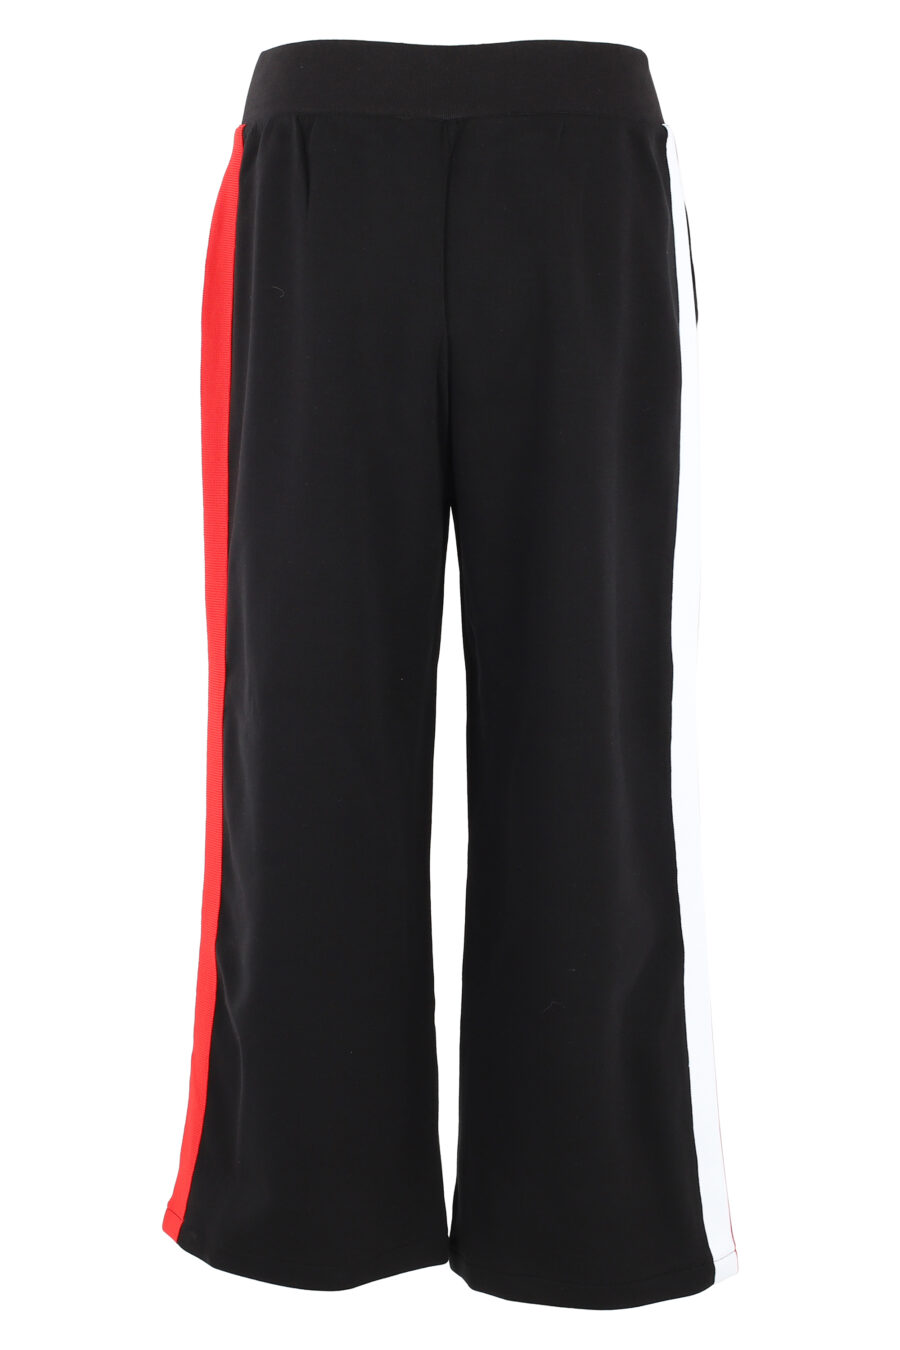 Tracksuit bottoms black with multicoloured side stripes - IMG 5053